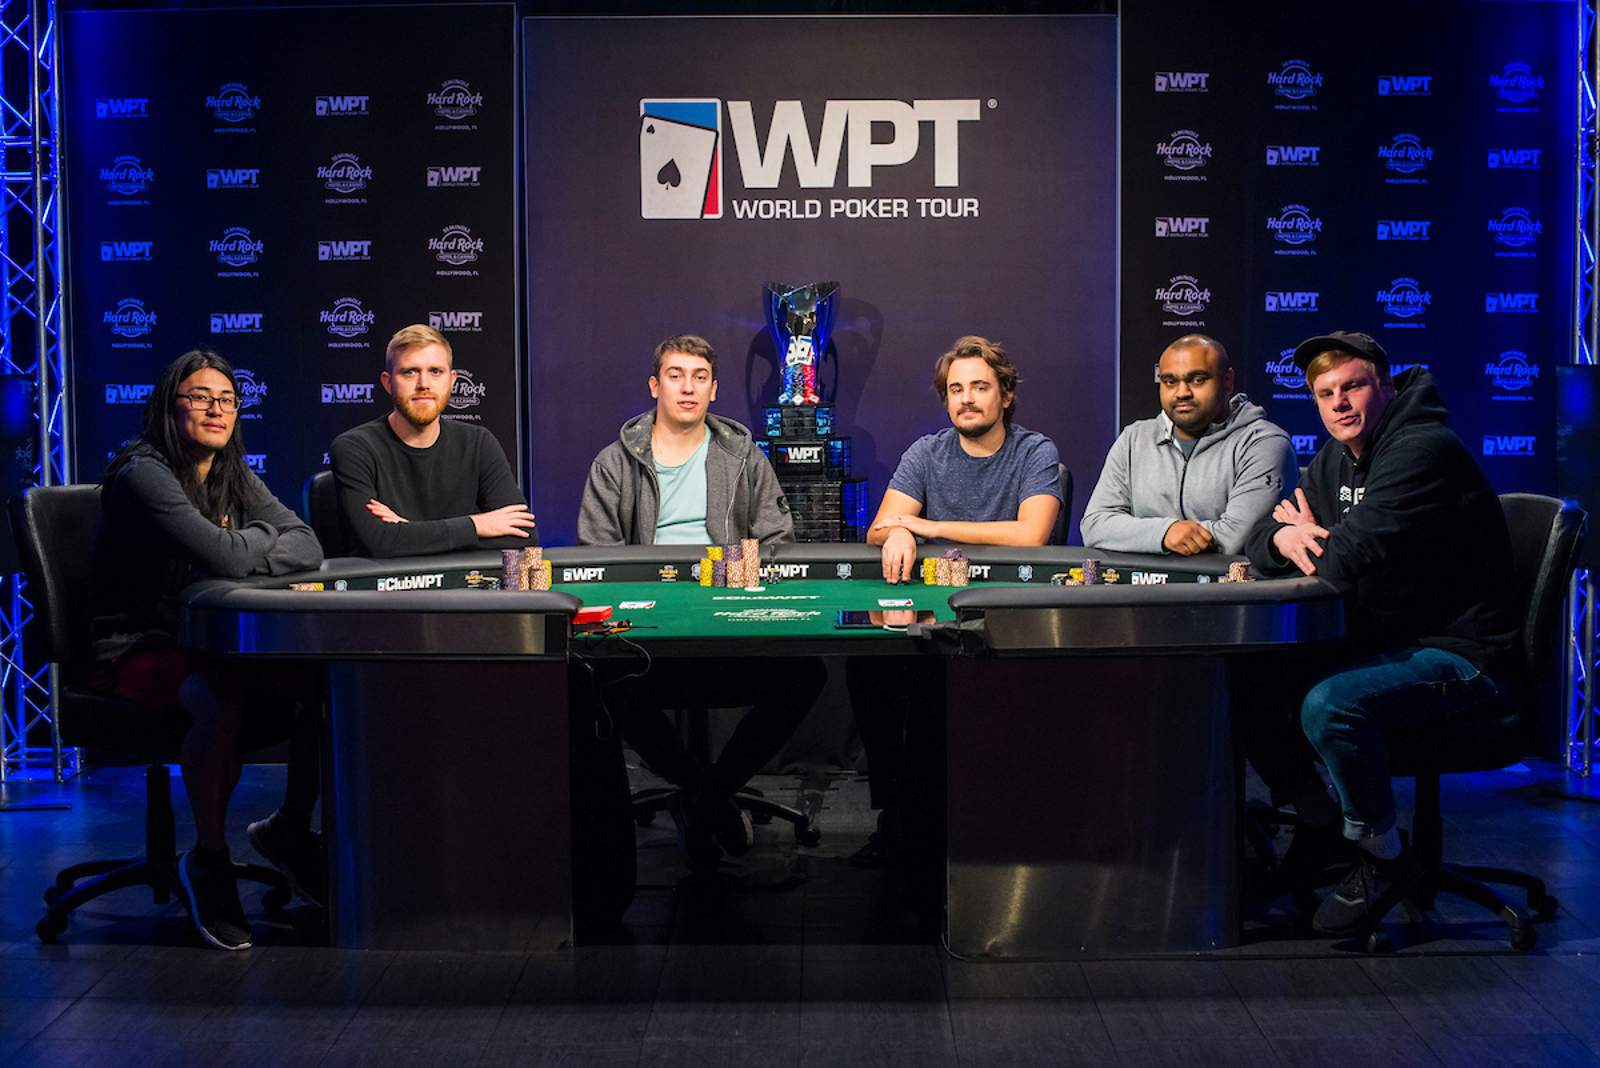 Rock 'N' Roll with the World Poker Tour on PokerGO